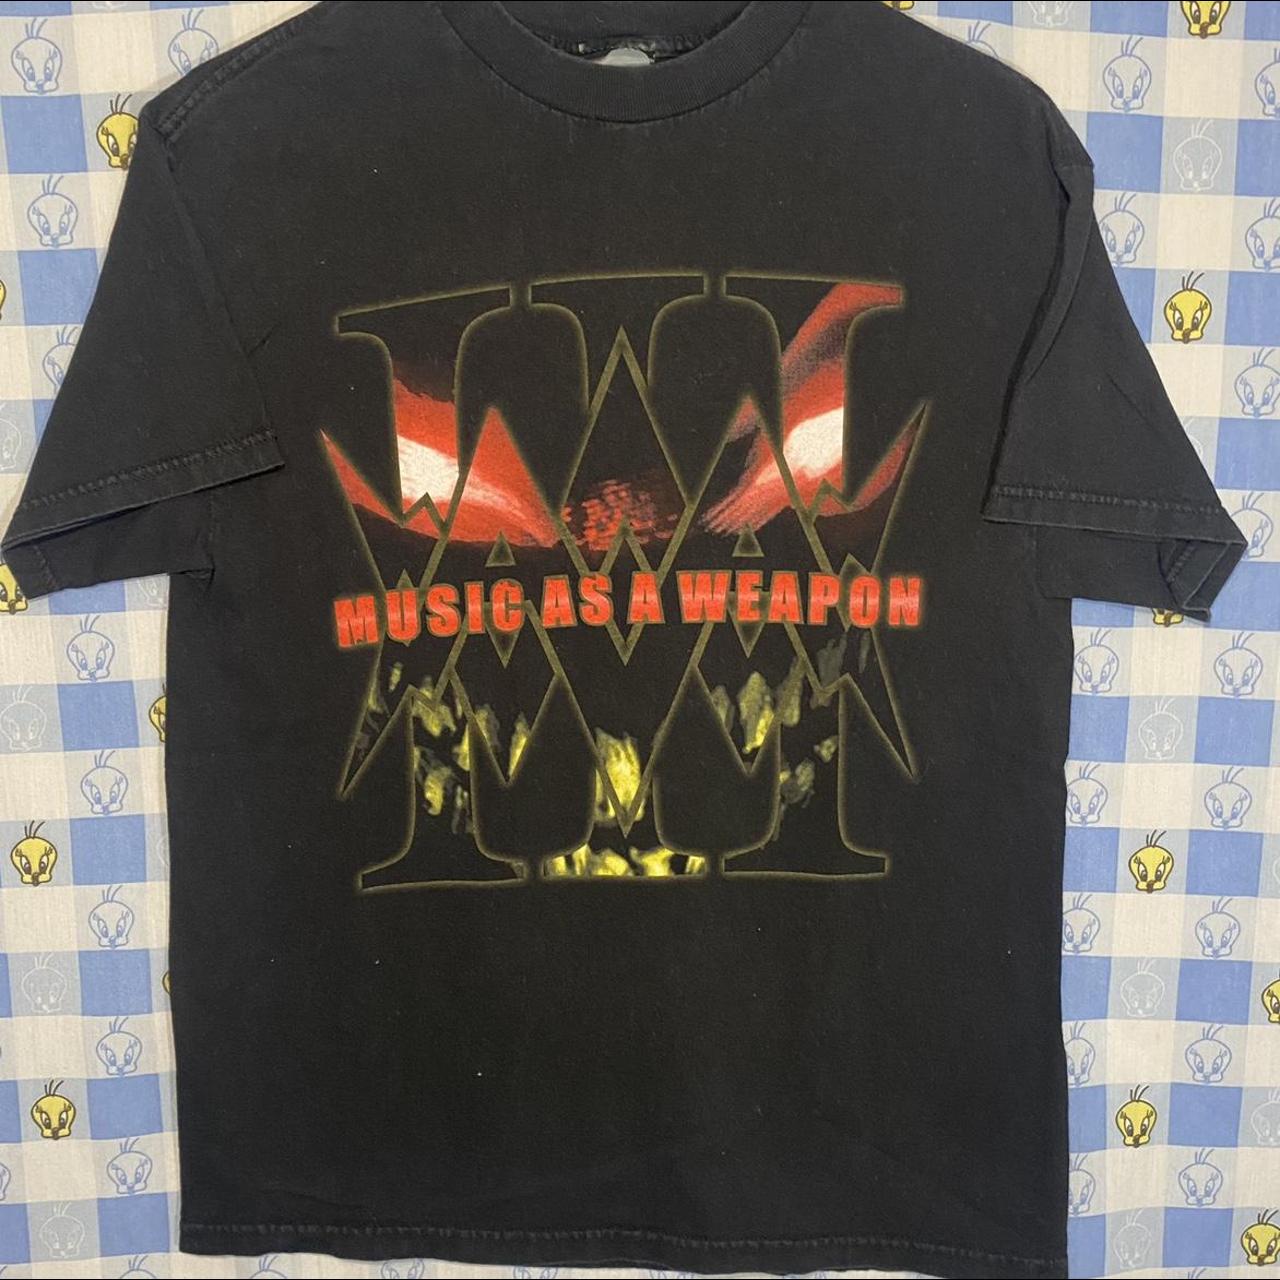 Product Image 1 - Music As A Weapon T-Shirt
2006-07